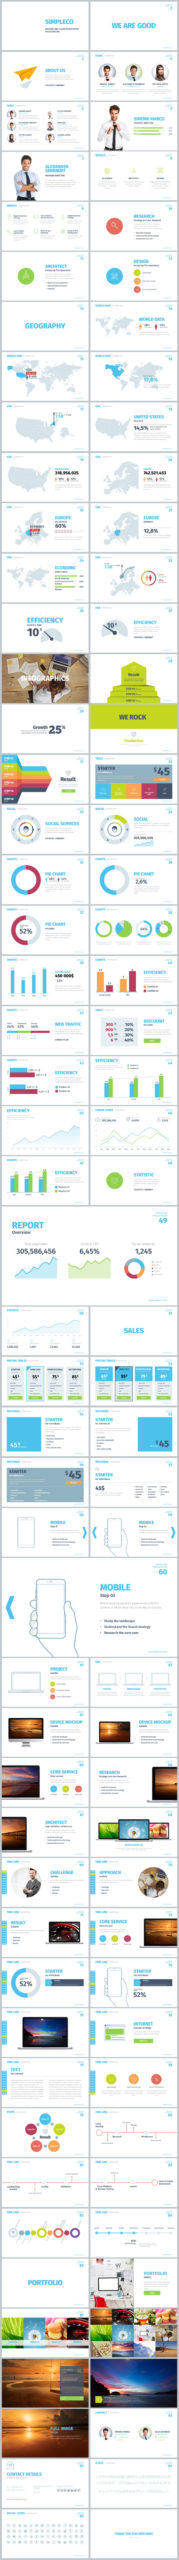 Simpleco: Minimalistic Business Powerpoint Template - 3